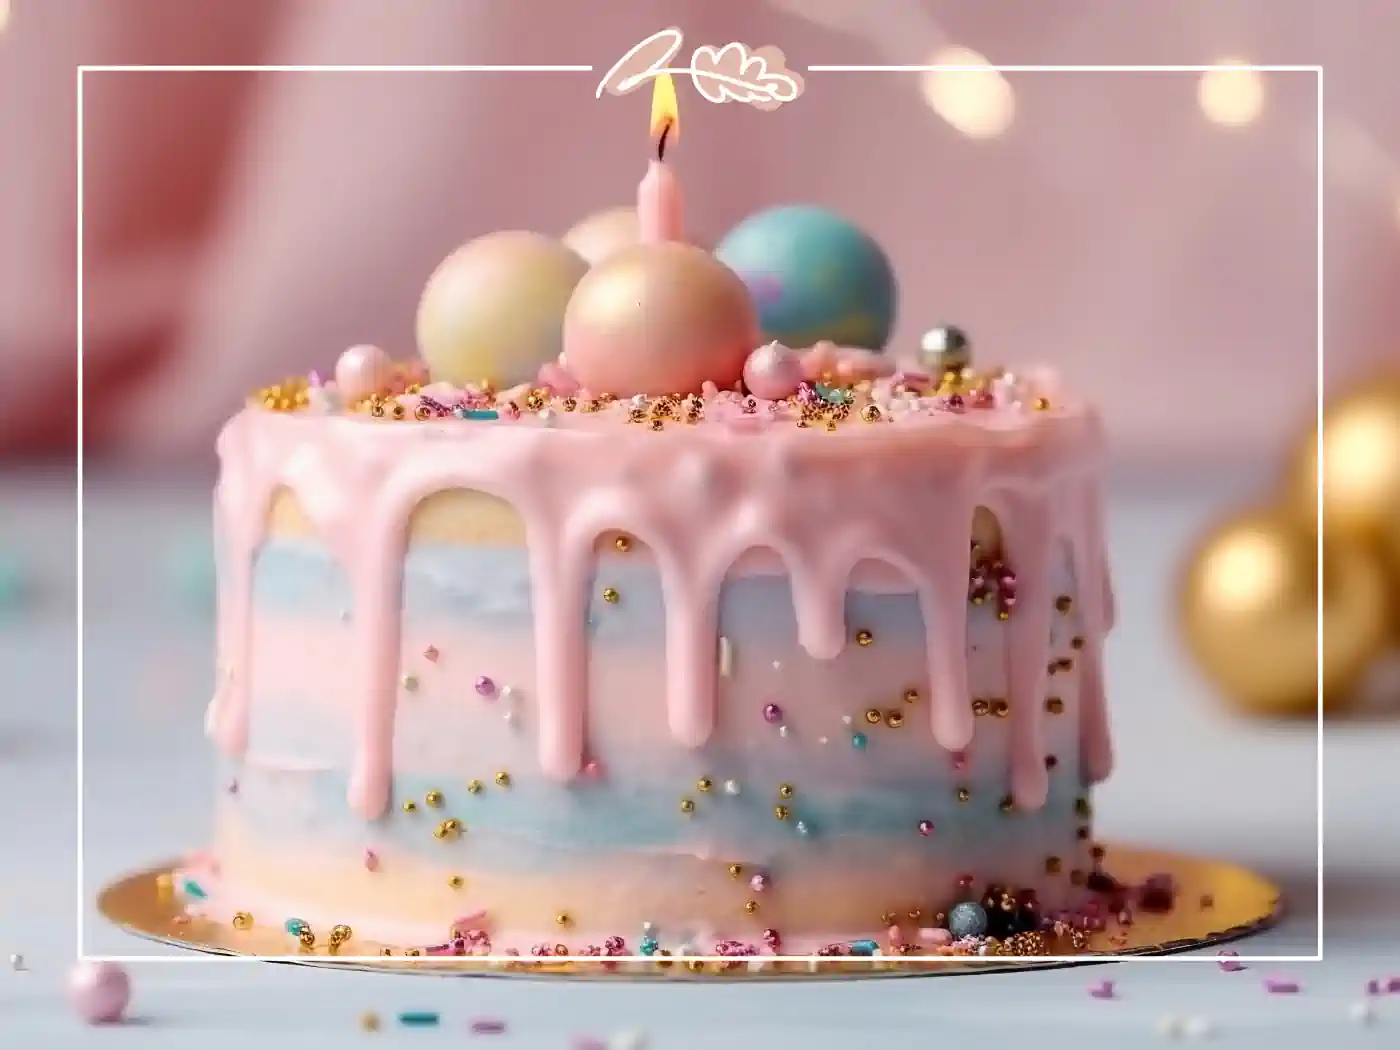 A pastel-colored birthday cake with a single lit candle, decorated with sprinkles and fondant balls. Fabulous Flowers and Gifts - Birthday Collection.